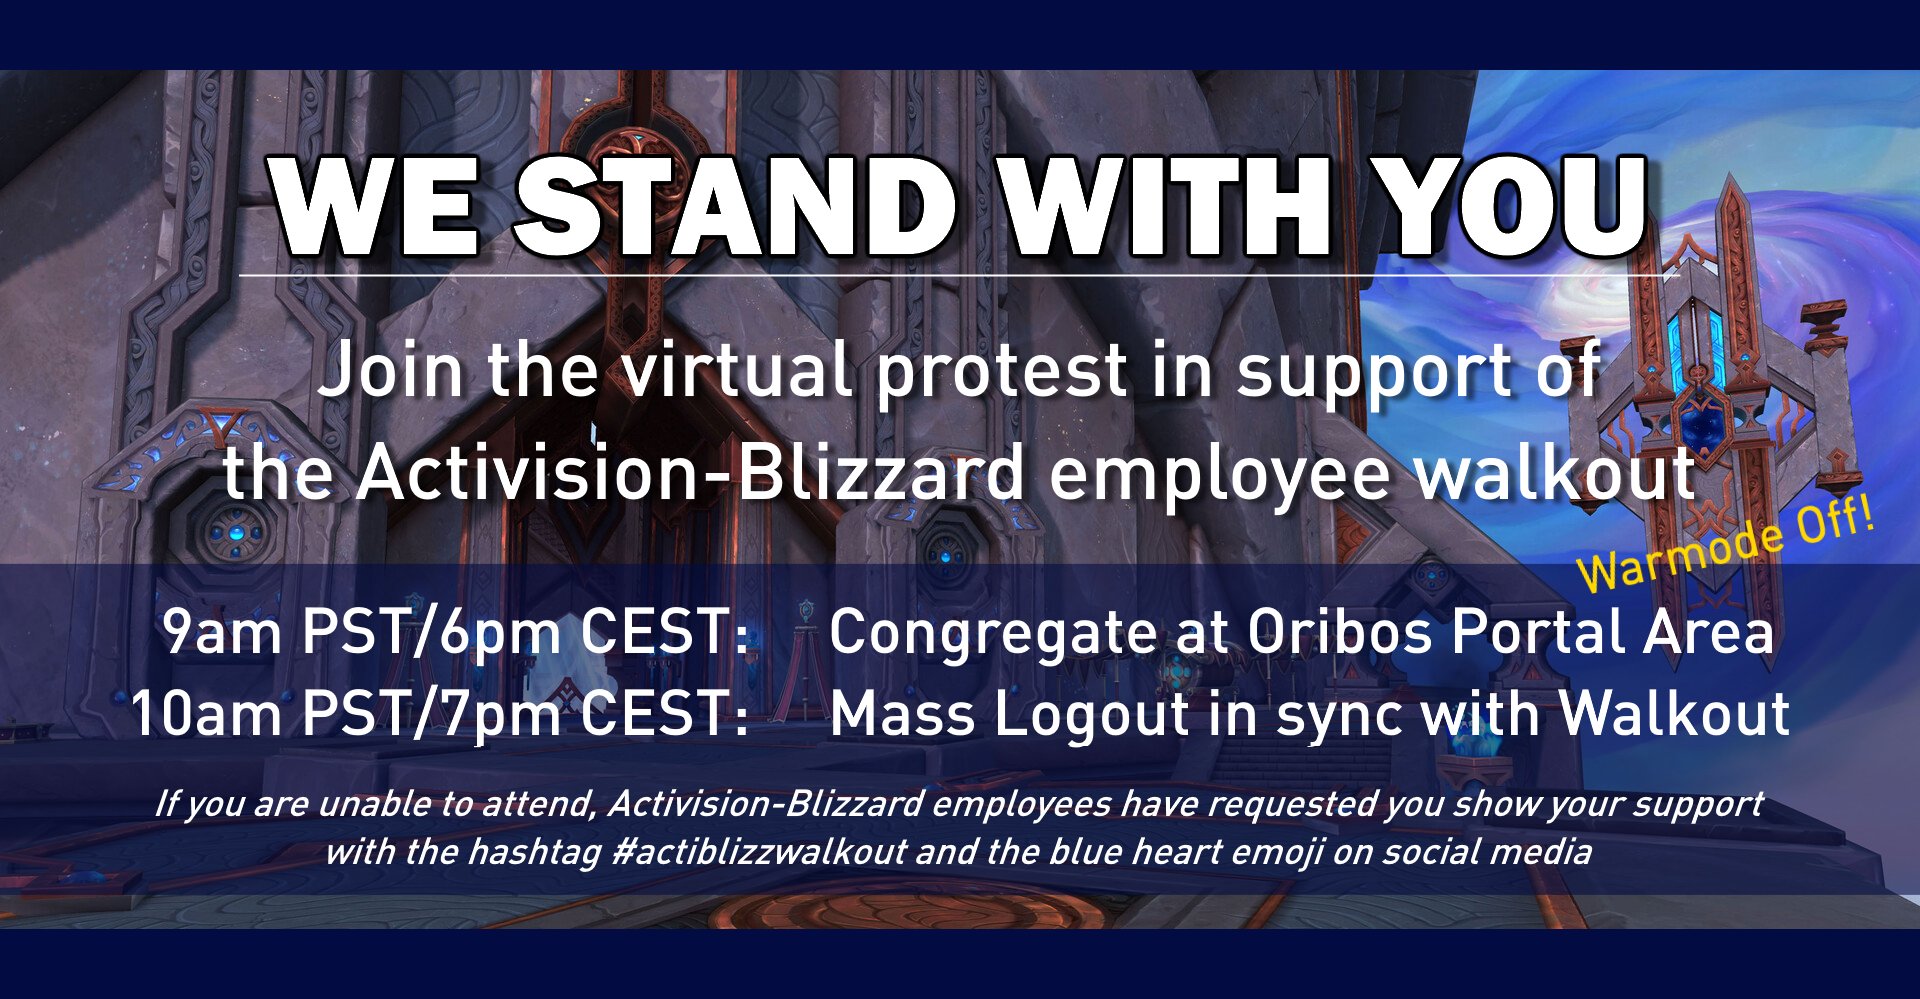 World of Warcraft players are staging a virtual walkout in support of Blizzard employees